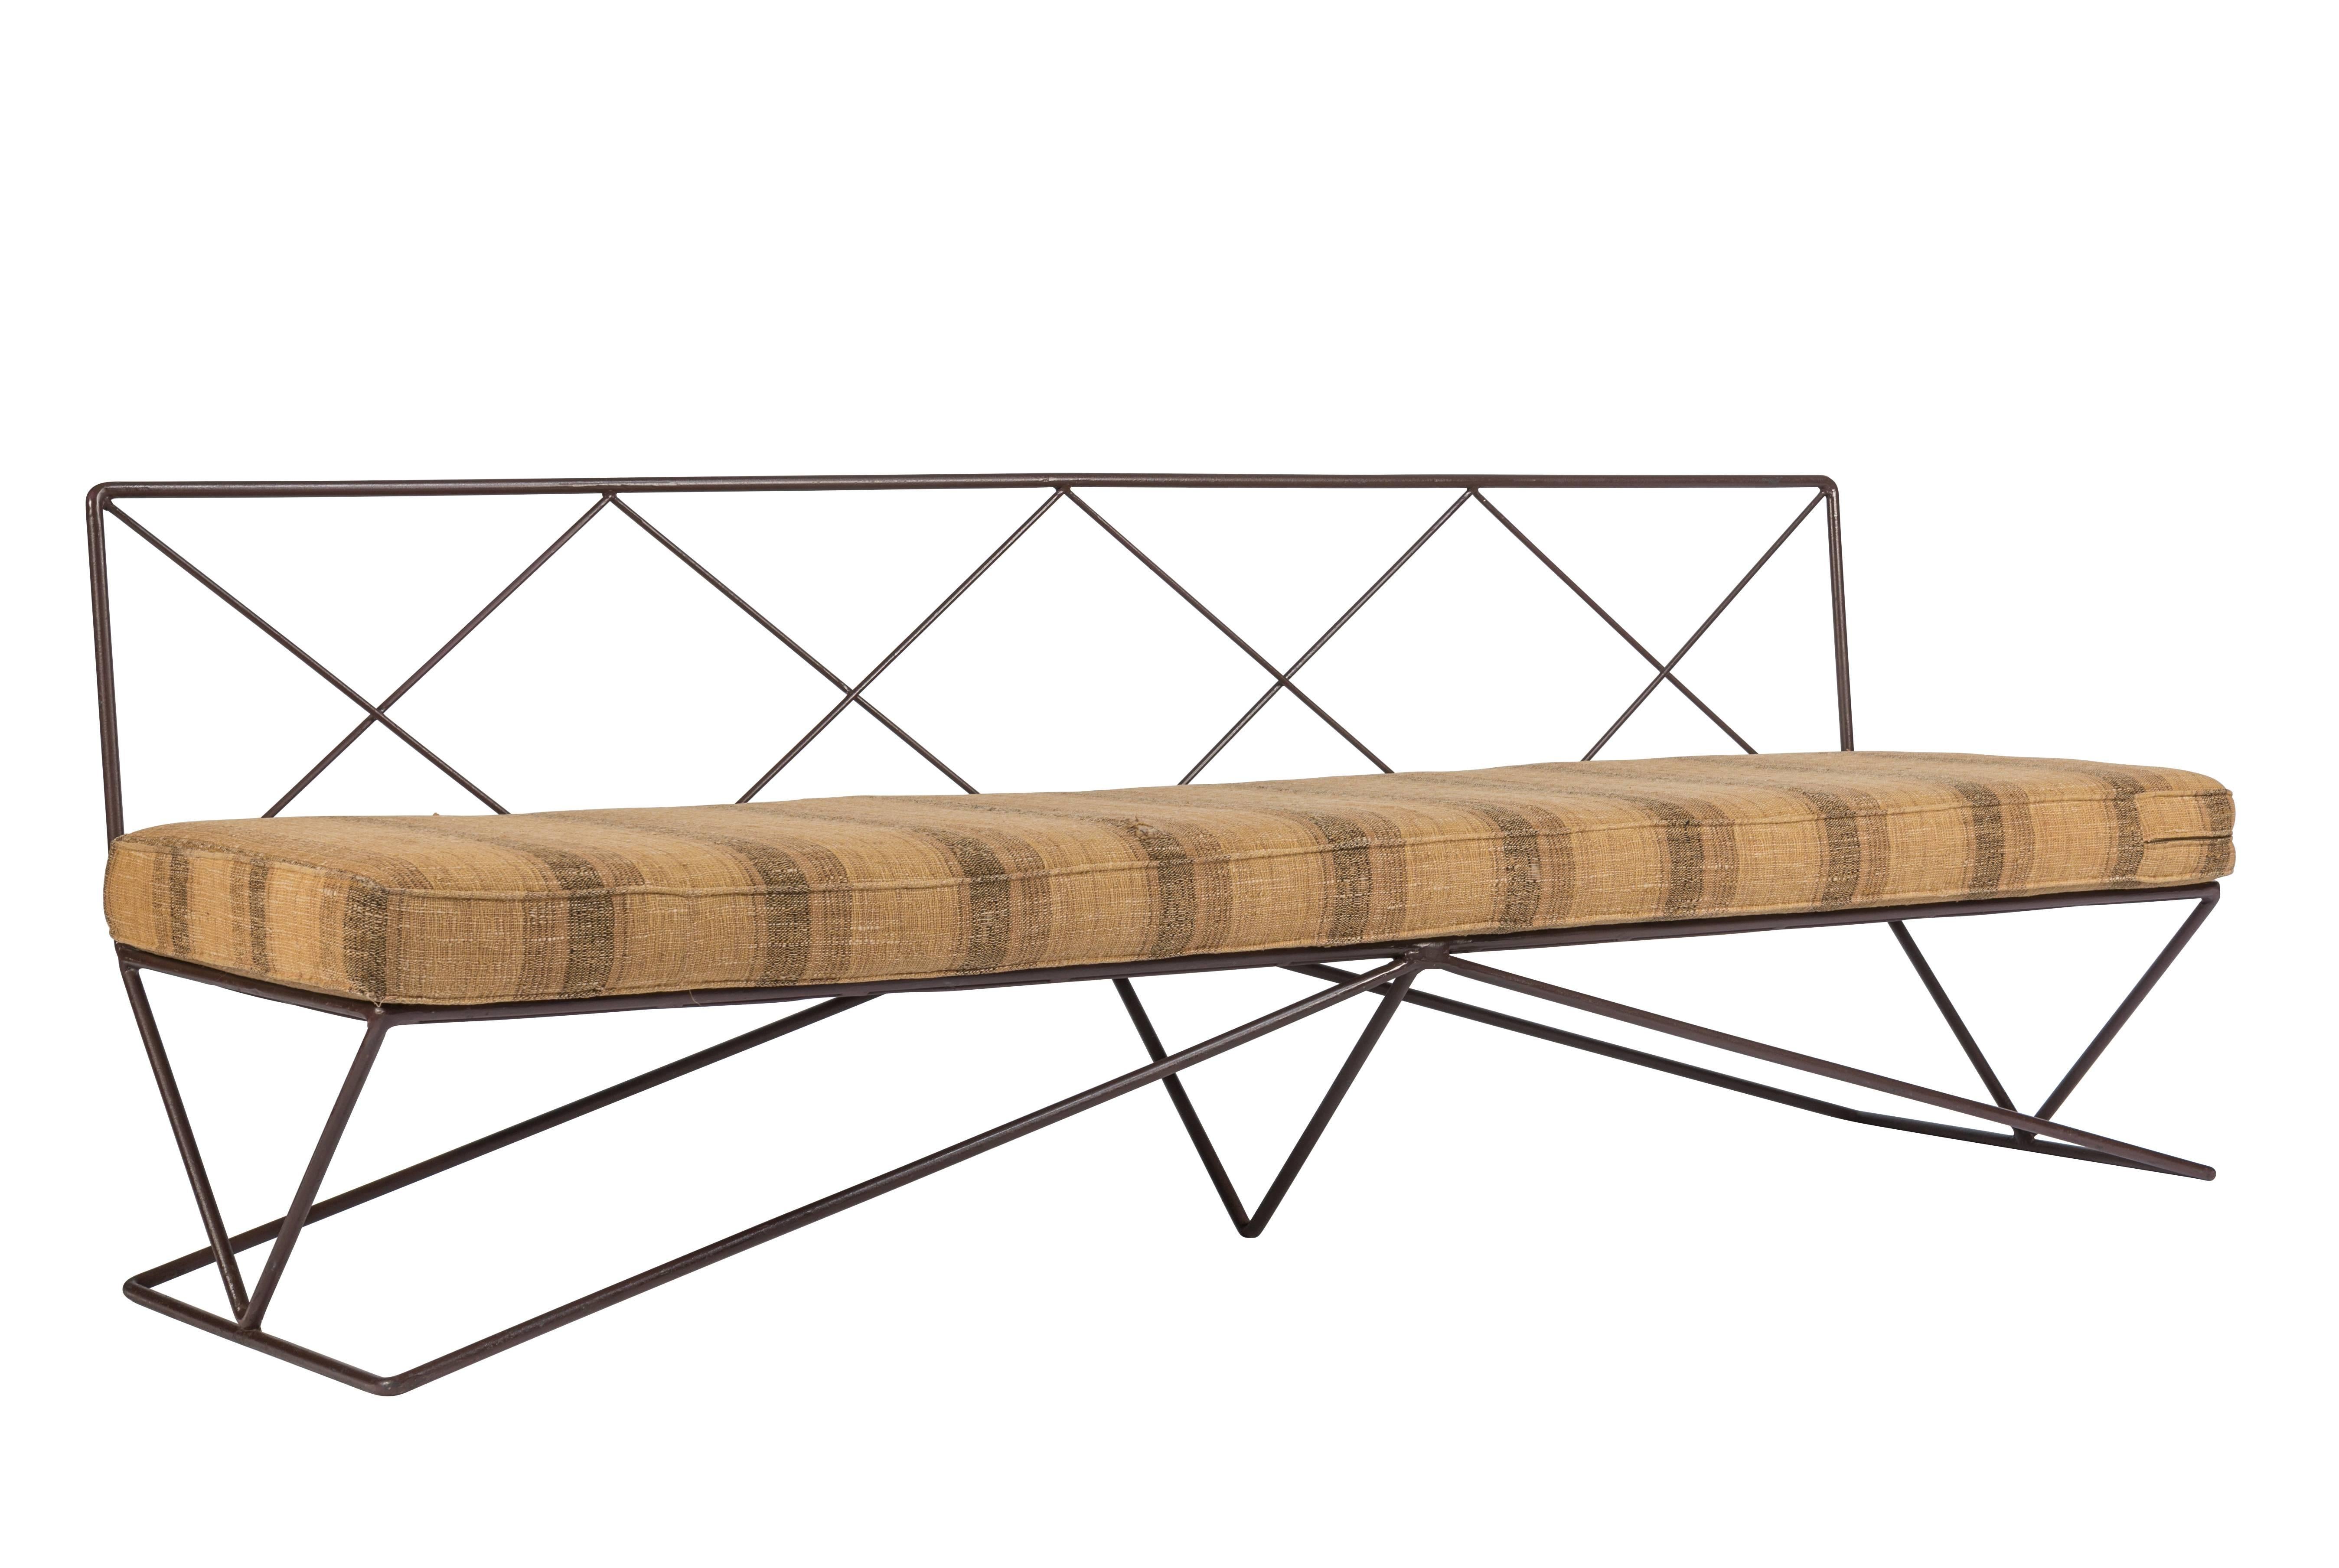 A rare Darrell Landrum wrought iron, steel, and fabric sofa for Avard Furniture Co., New York, New York, designed 1949, and produced circa 1955. The base is composed of 3 large connected triangles supporting a perforated metal deck, the back of